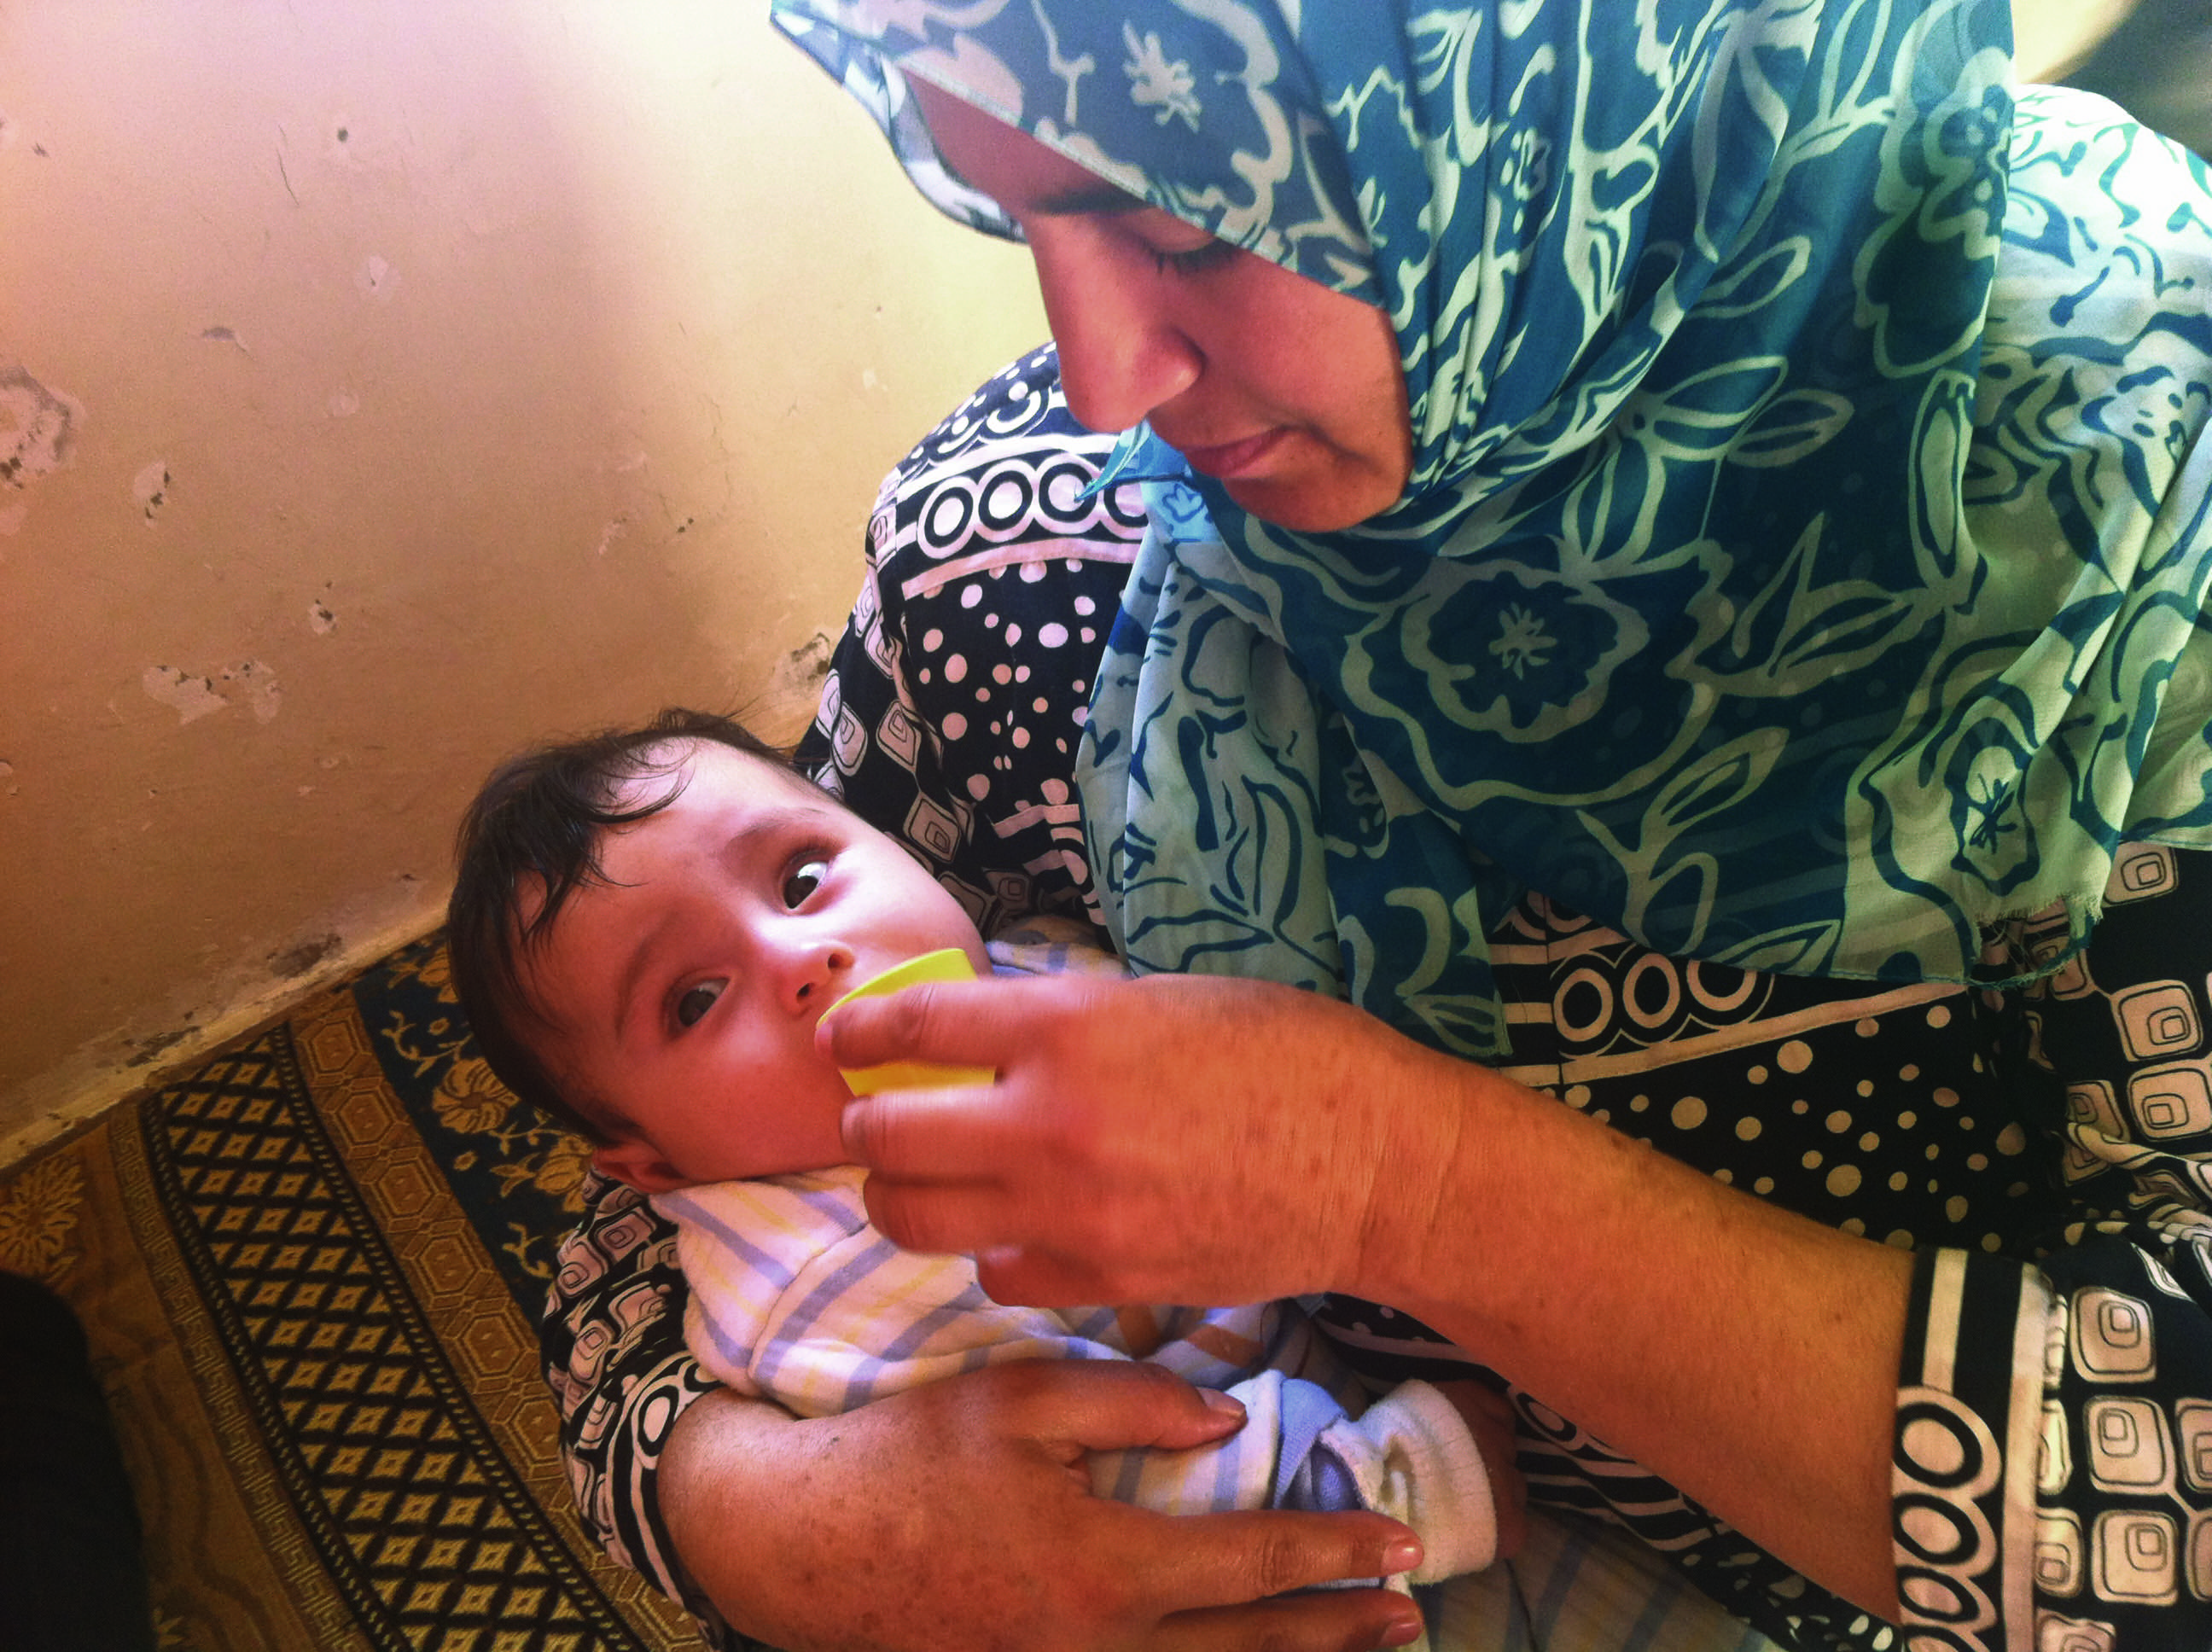 After receiving individual counselling, a woman is cup feeding her child with expressed breastmilk